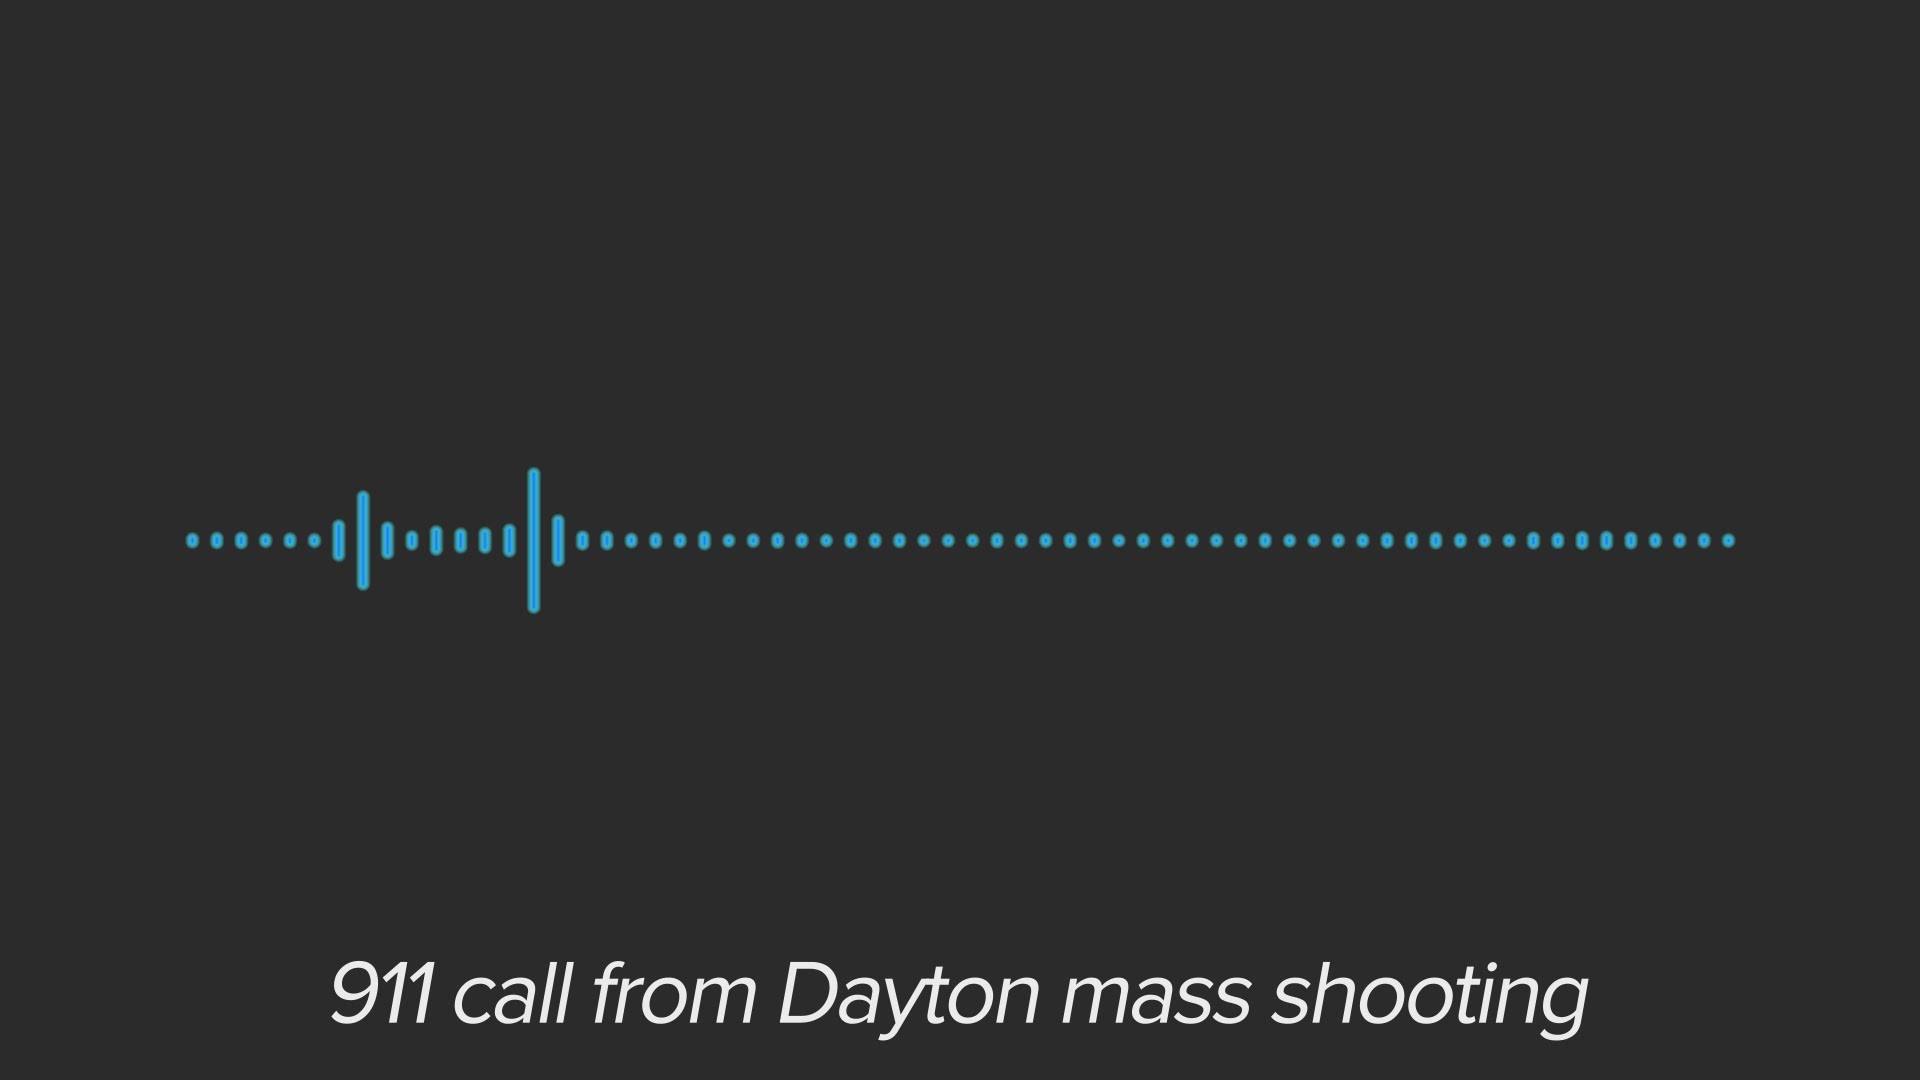 Dayton police provided this 911 call that came in for the mass shooting on August 4.